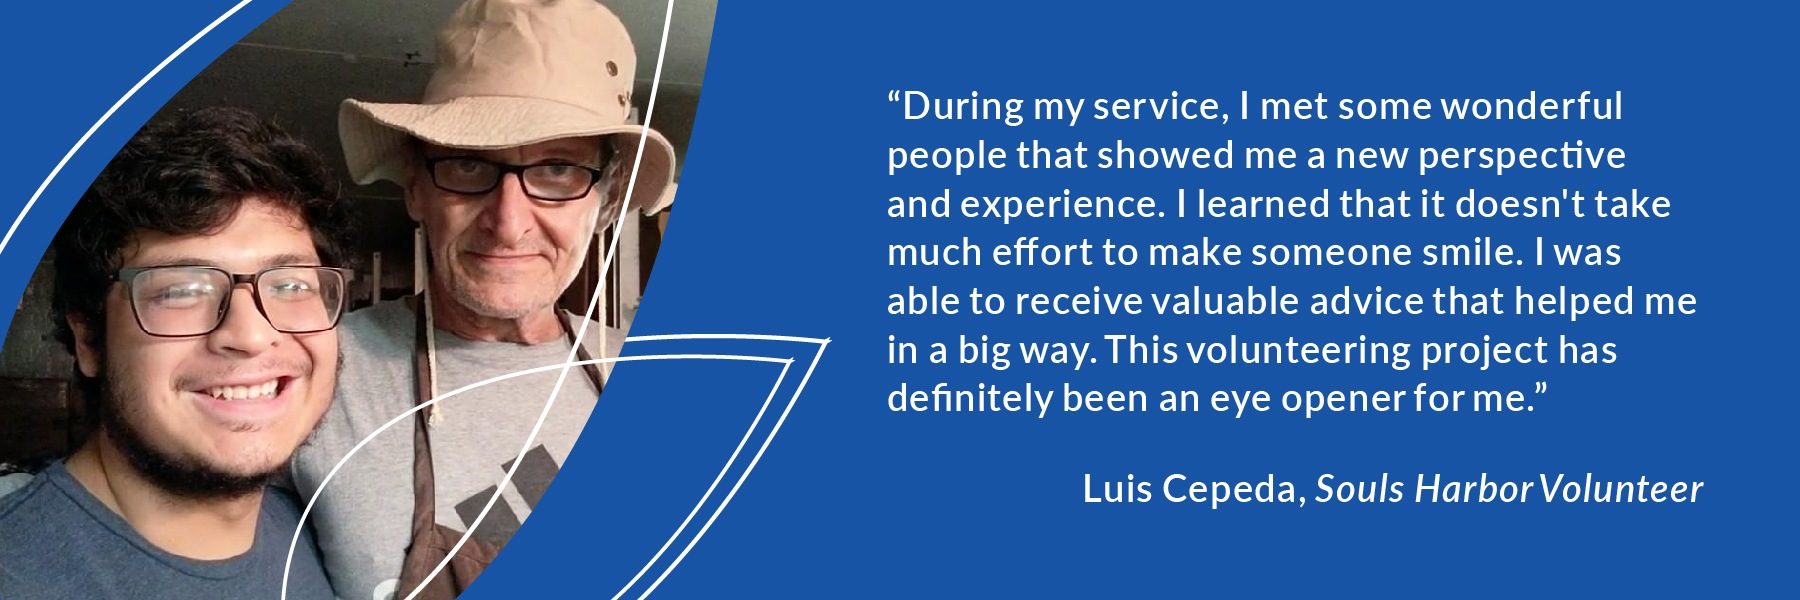 “During my service, I met some wonderful people that showed me a new perspective and experience. I learned that it doesn't take much effort to make someone smile. I was able to receive valuable advice that helped me in a big way. This volunteering project has definitely been an eye opener for me.” Luis Cepeda, Souls Harbor Volunteer